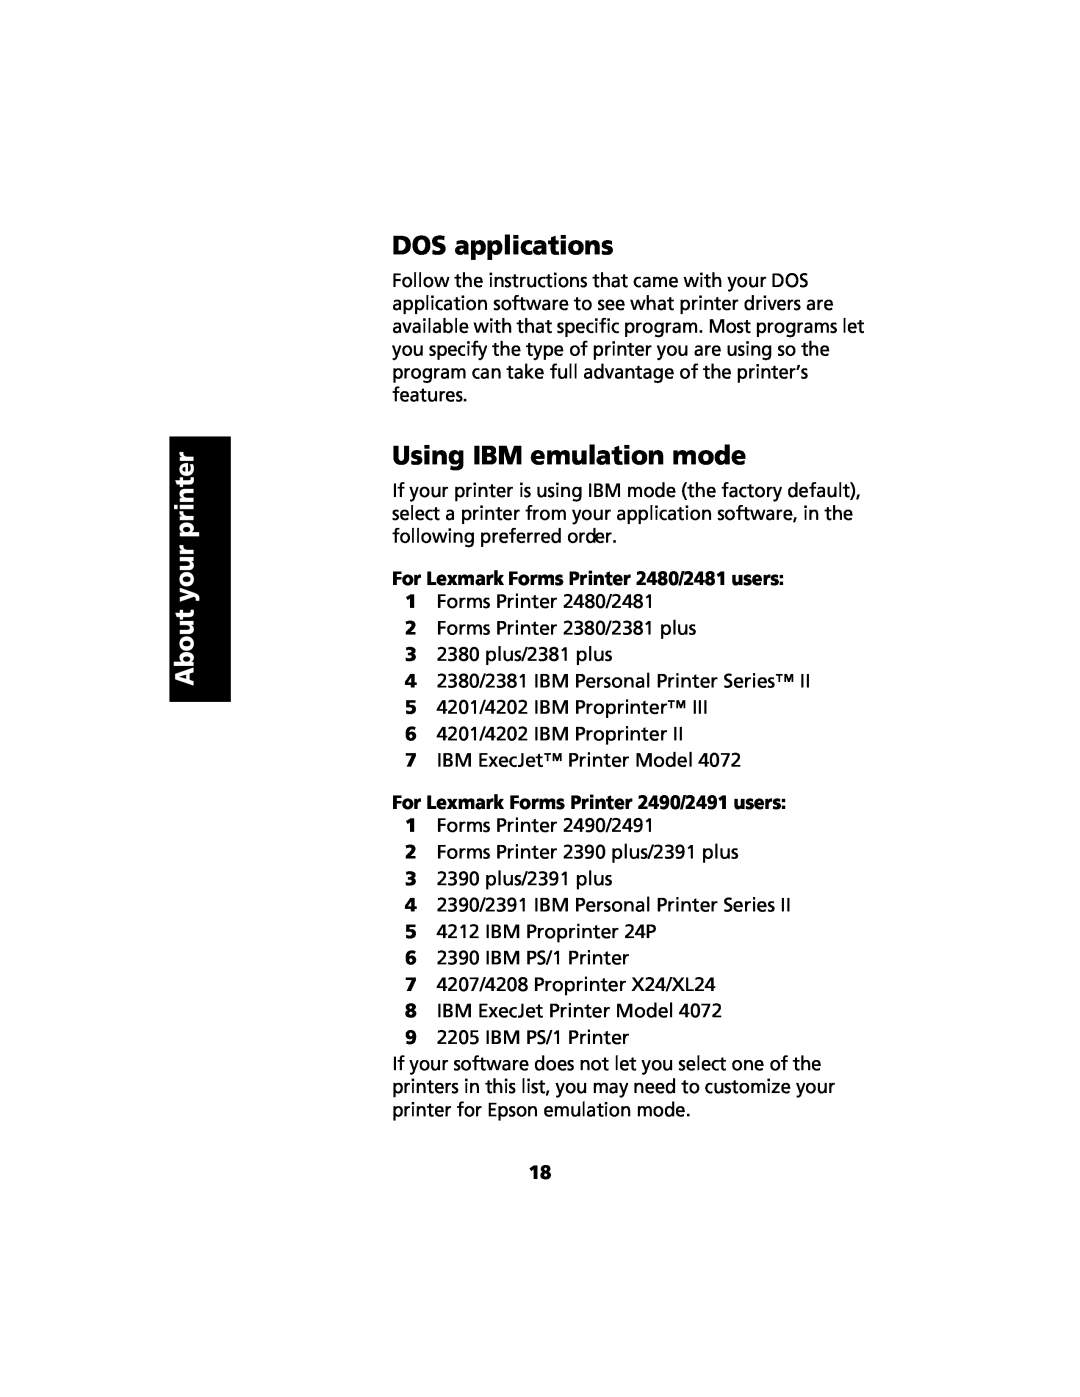 Lexmark manual DOS applications, Using IBM emulation mode, For Lexmark Forms Printer 2480/2481 users, About your printer 